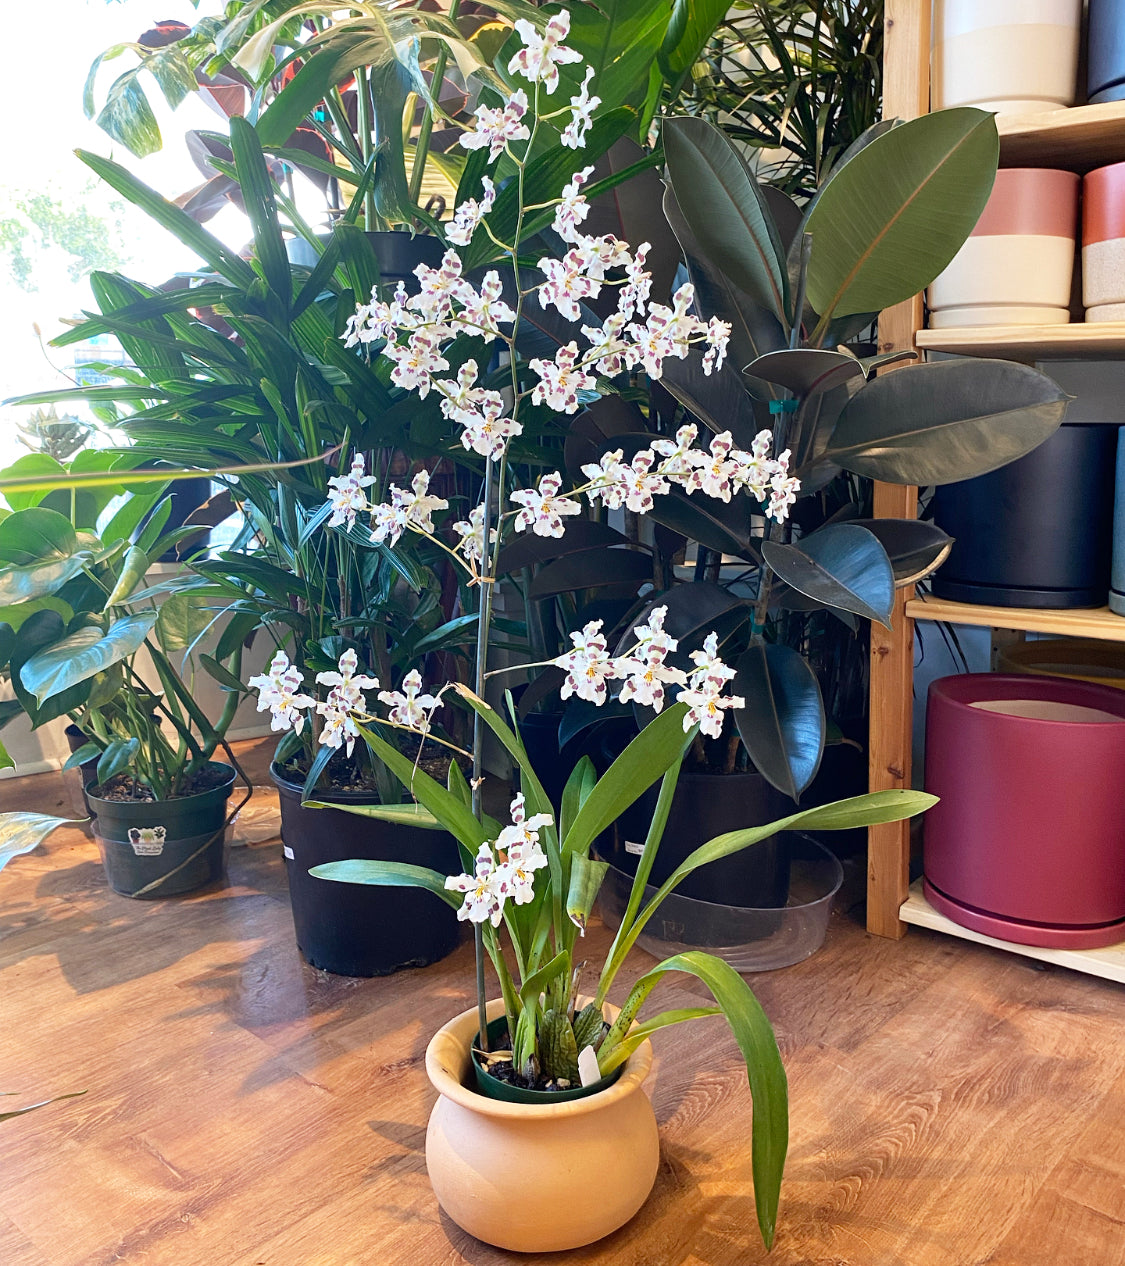 Giant Blooming Oncidium 'Tribbles'